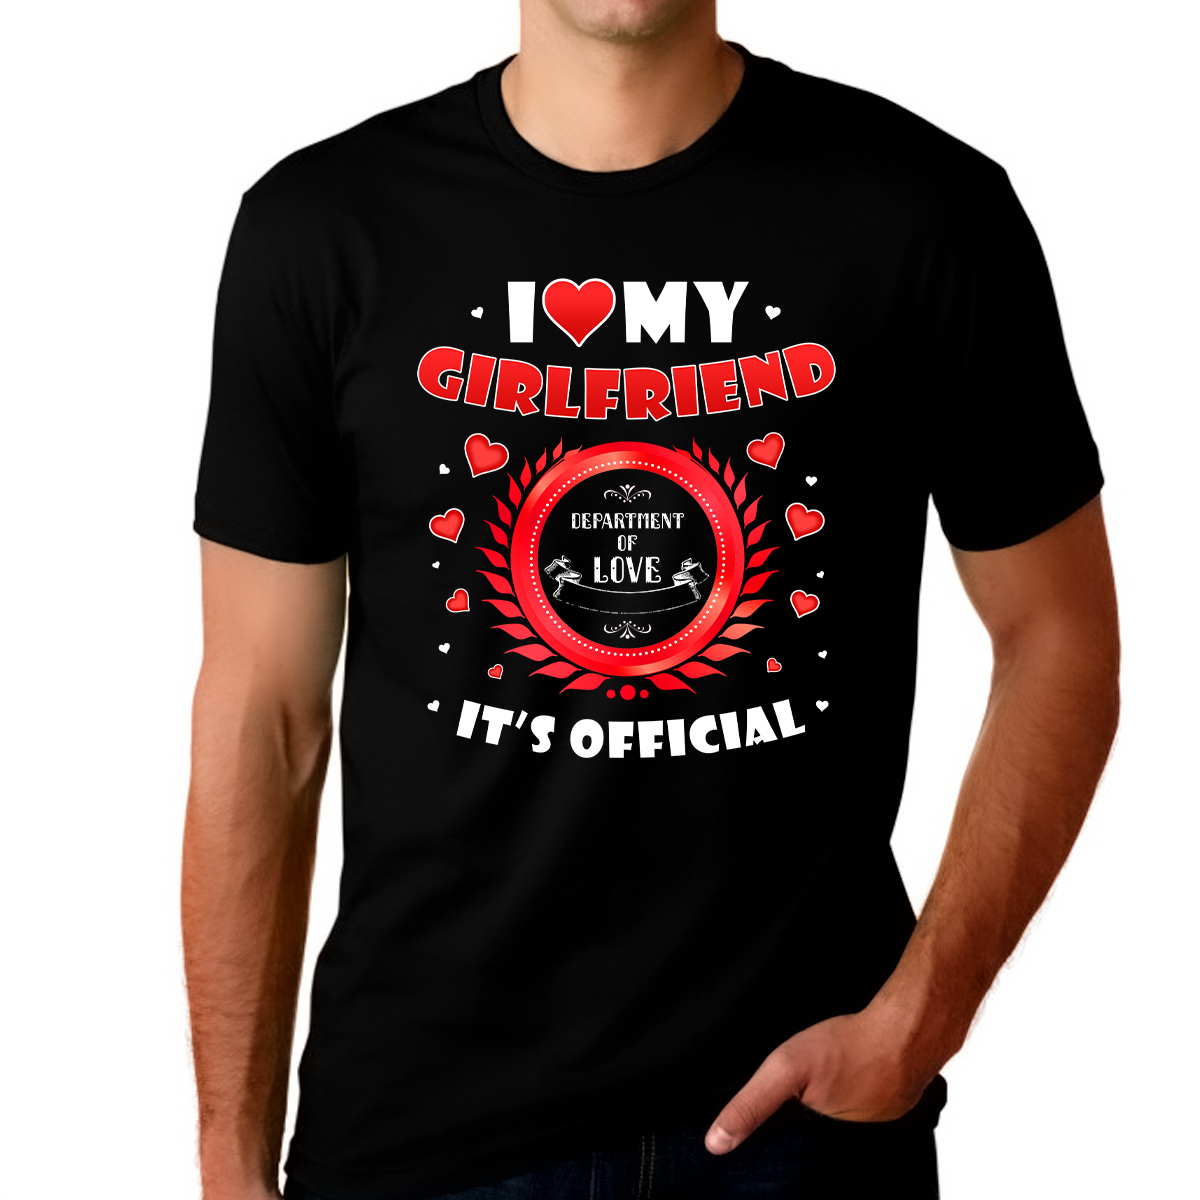 I Love My Girlfriend Shirt Funny I Heart My Girlfriend Official Shirt Valentines Day Gifts for Him